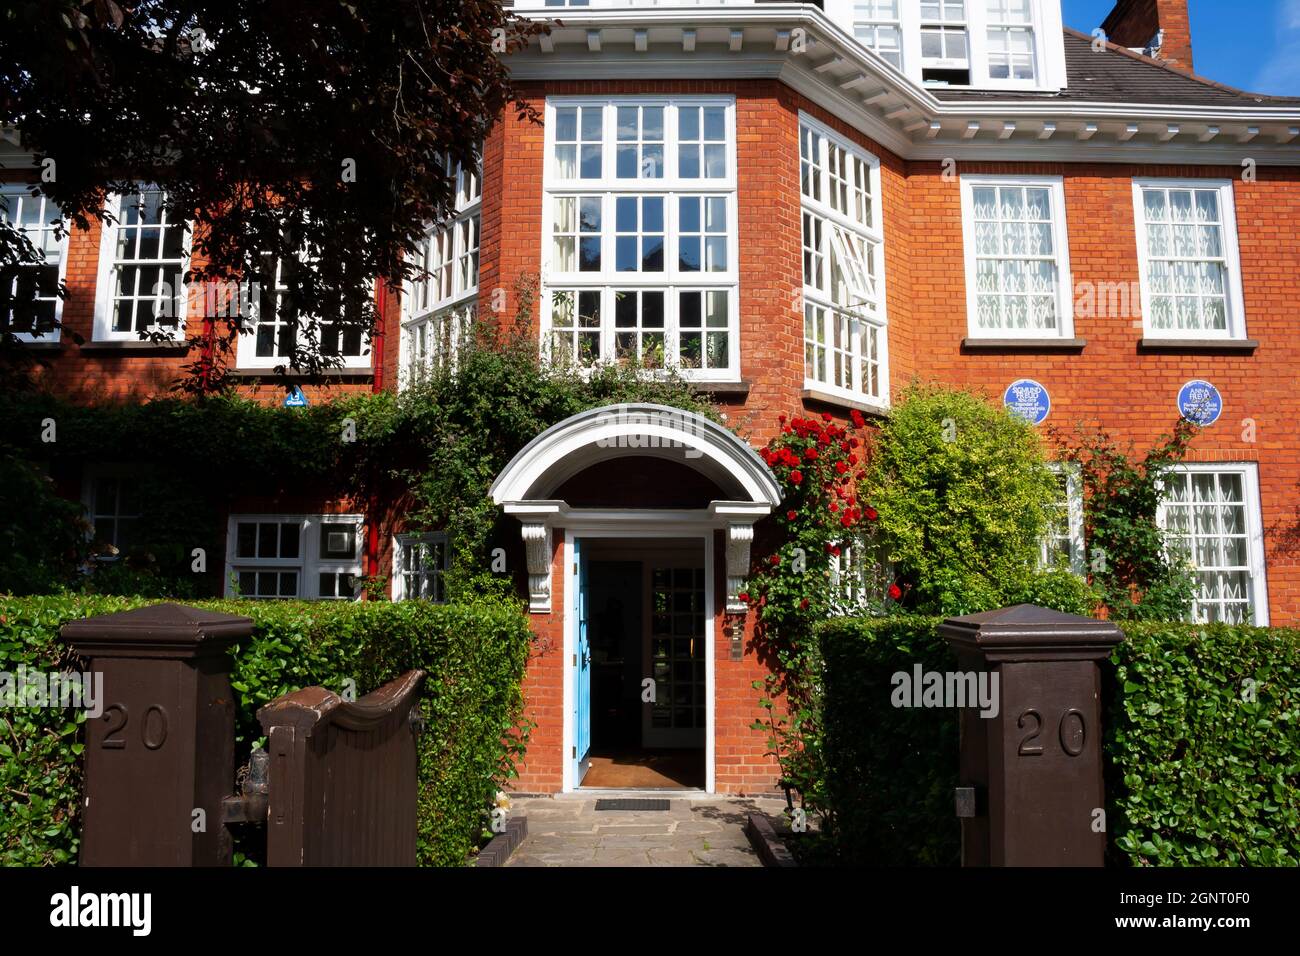 The entrance of the Freud Museum in London, which was the last home of Sigmund Freud, the founder of psychoanalysis Stock Photo